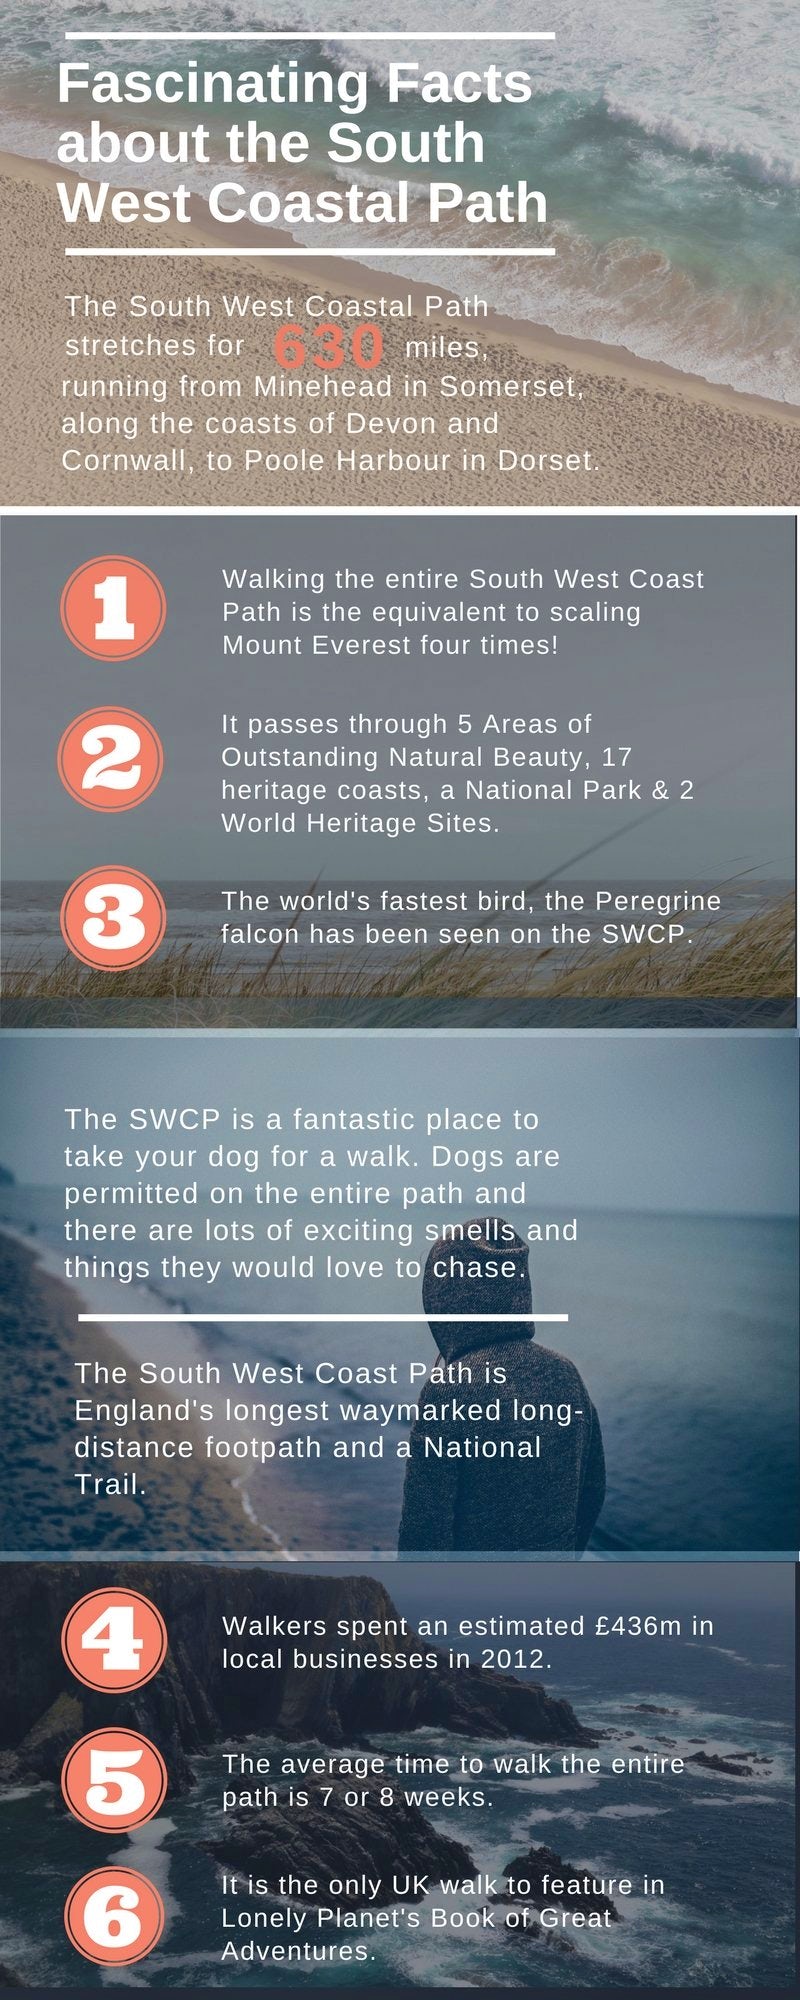 Fascinating Facts about the South West Coastal Path | JFH Infographic